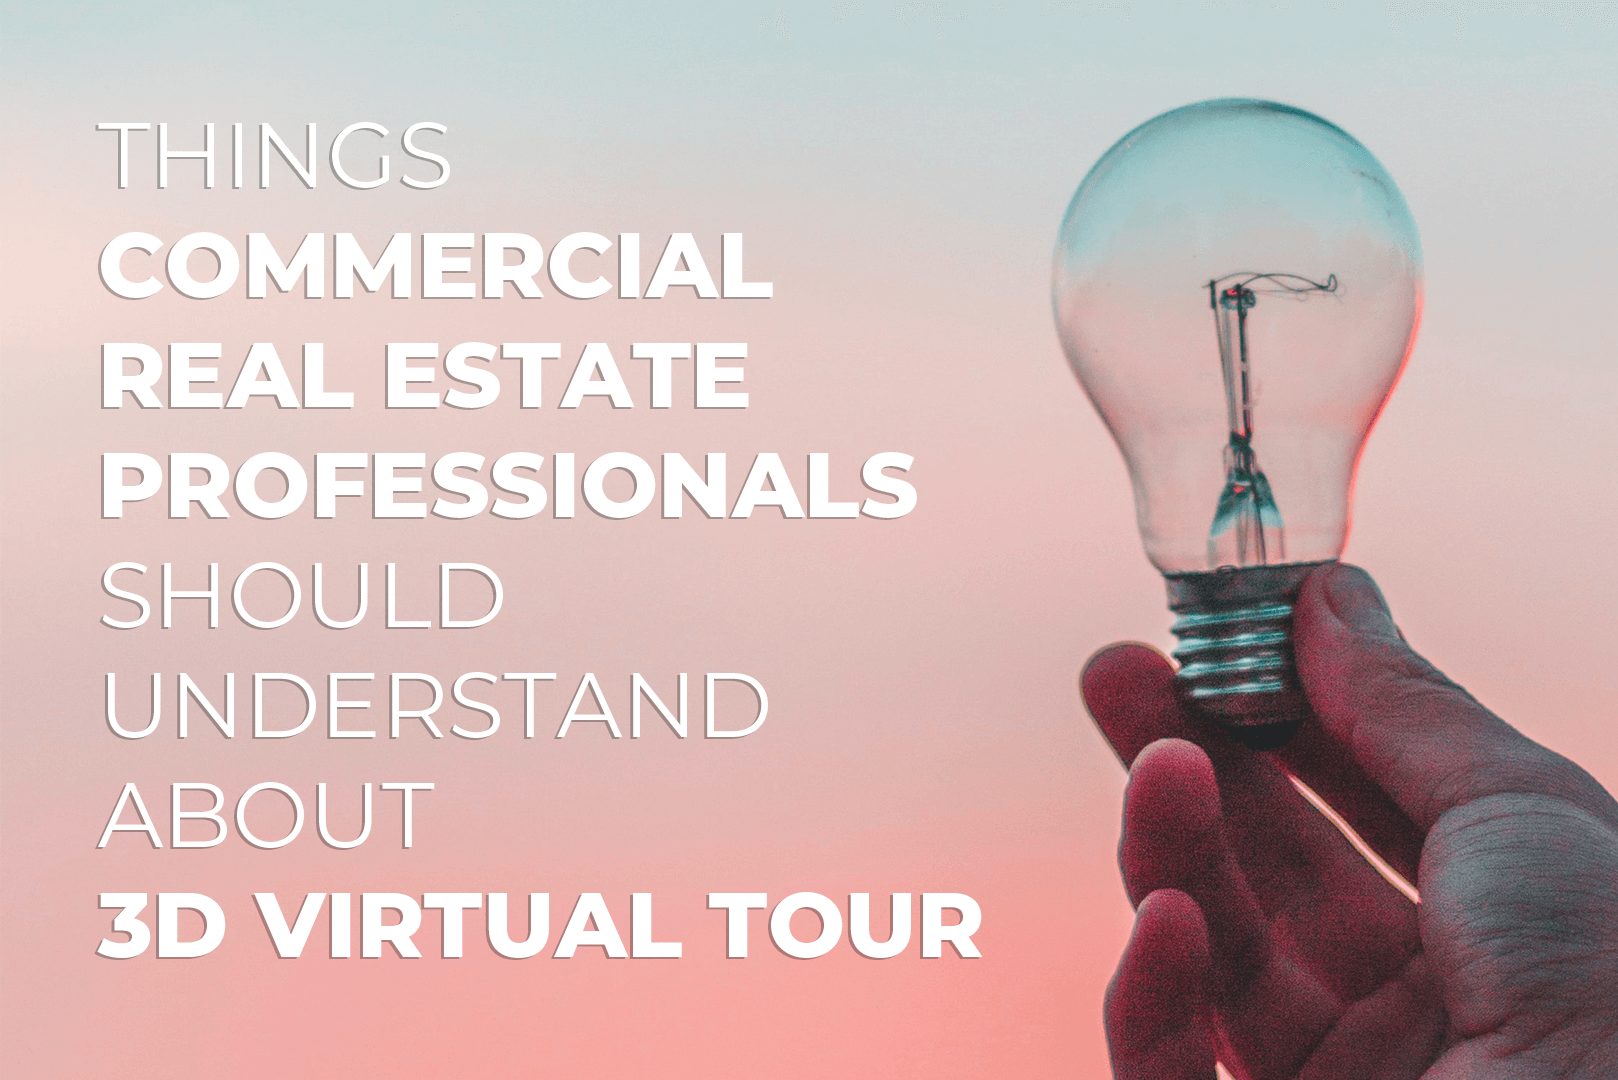 Things Commercial Real Estate Professionals Should Understand About 3D Virtual Tour